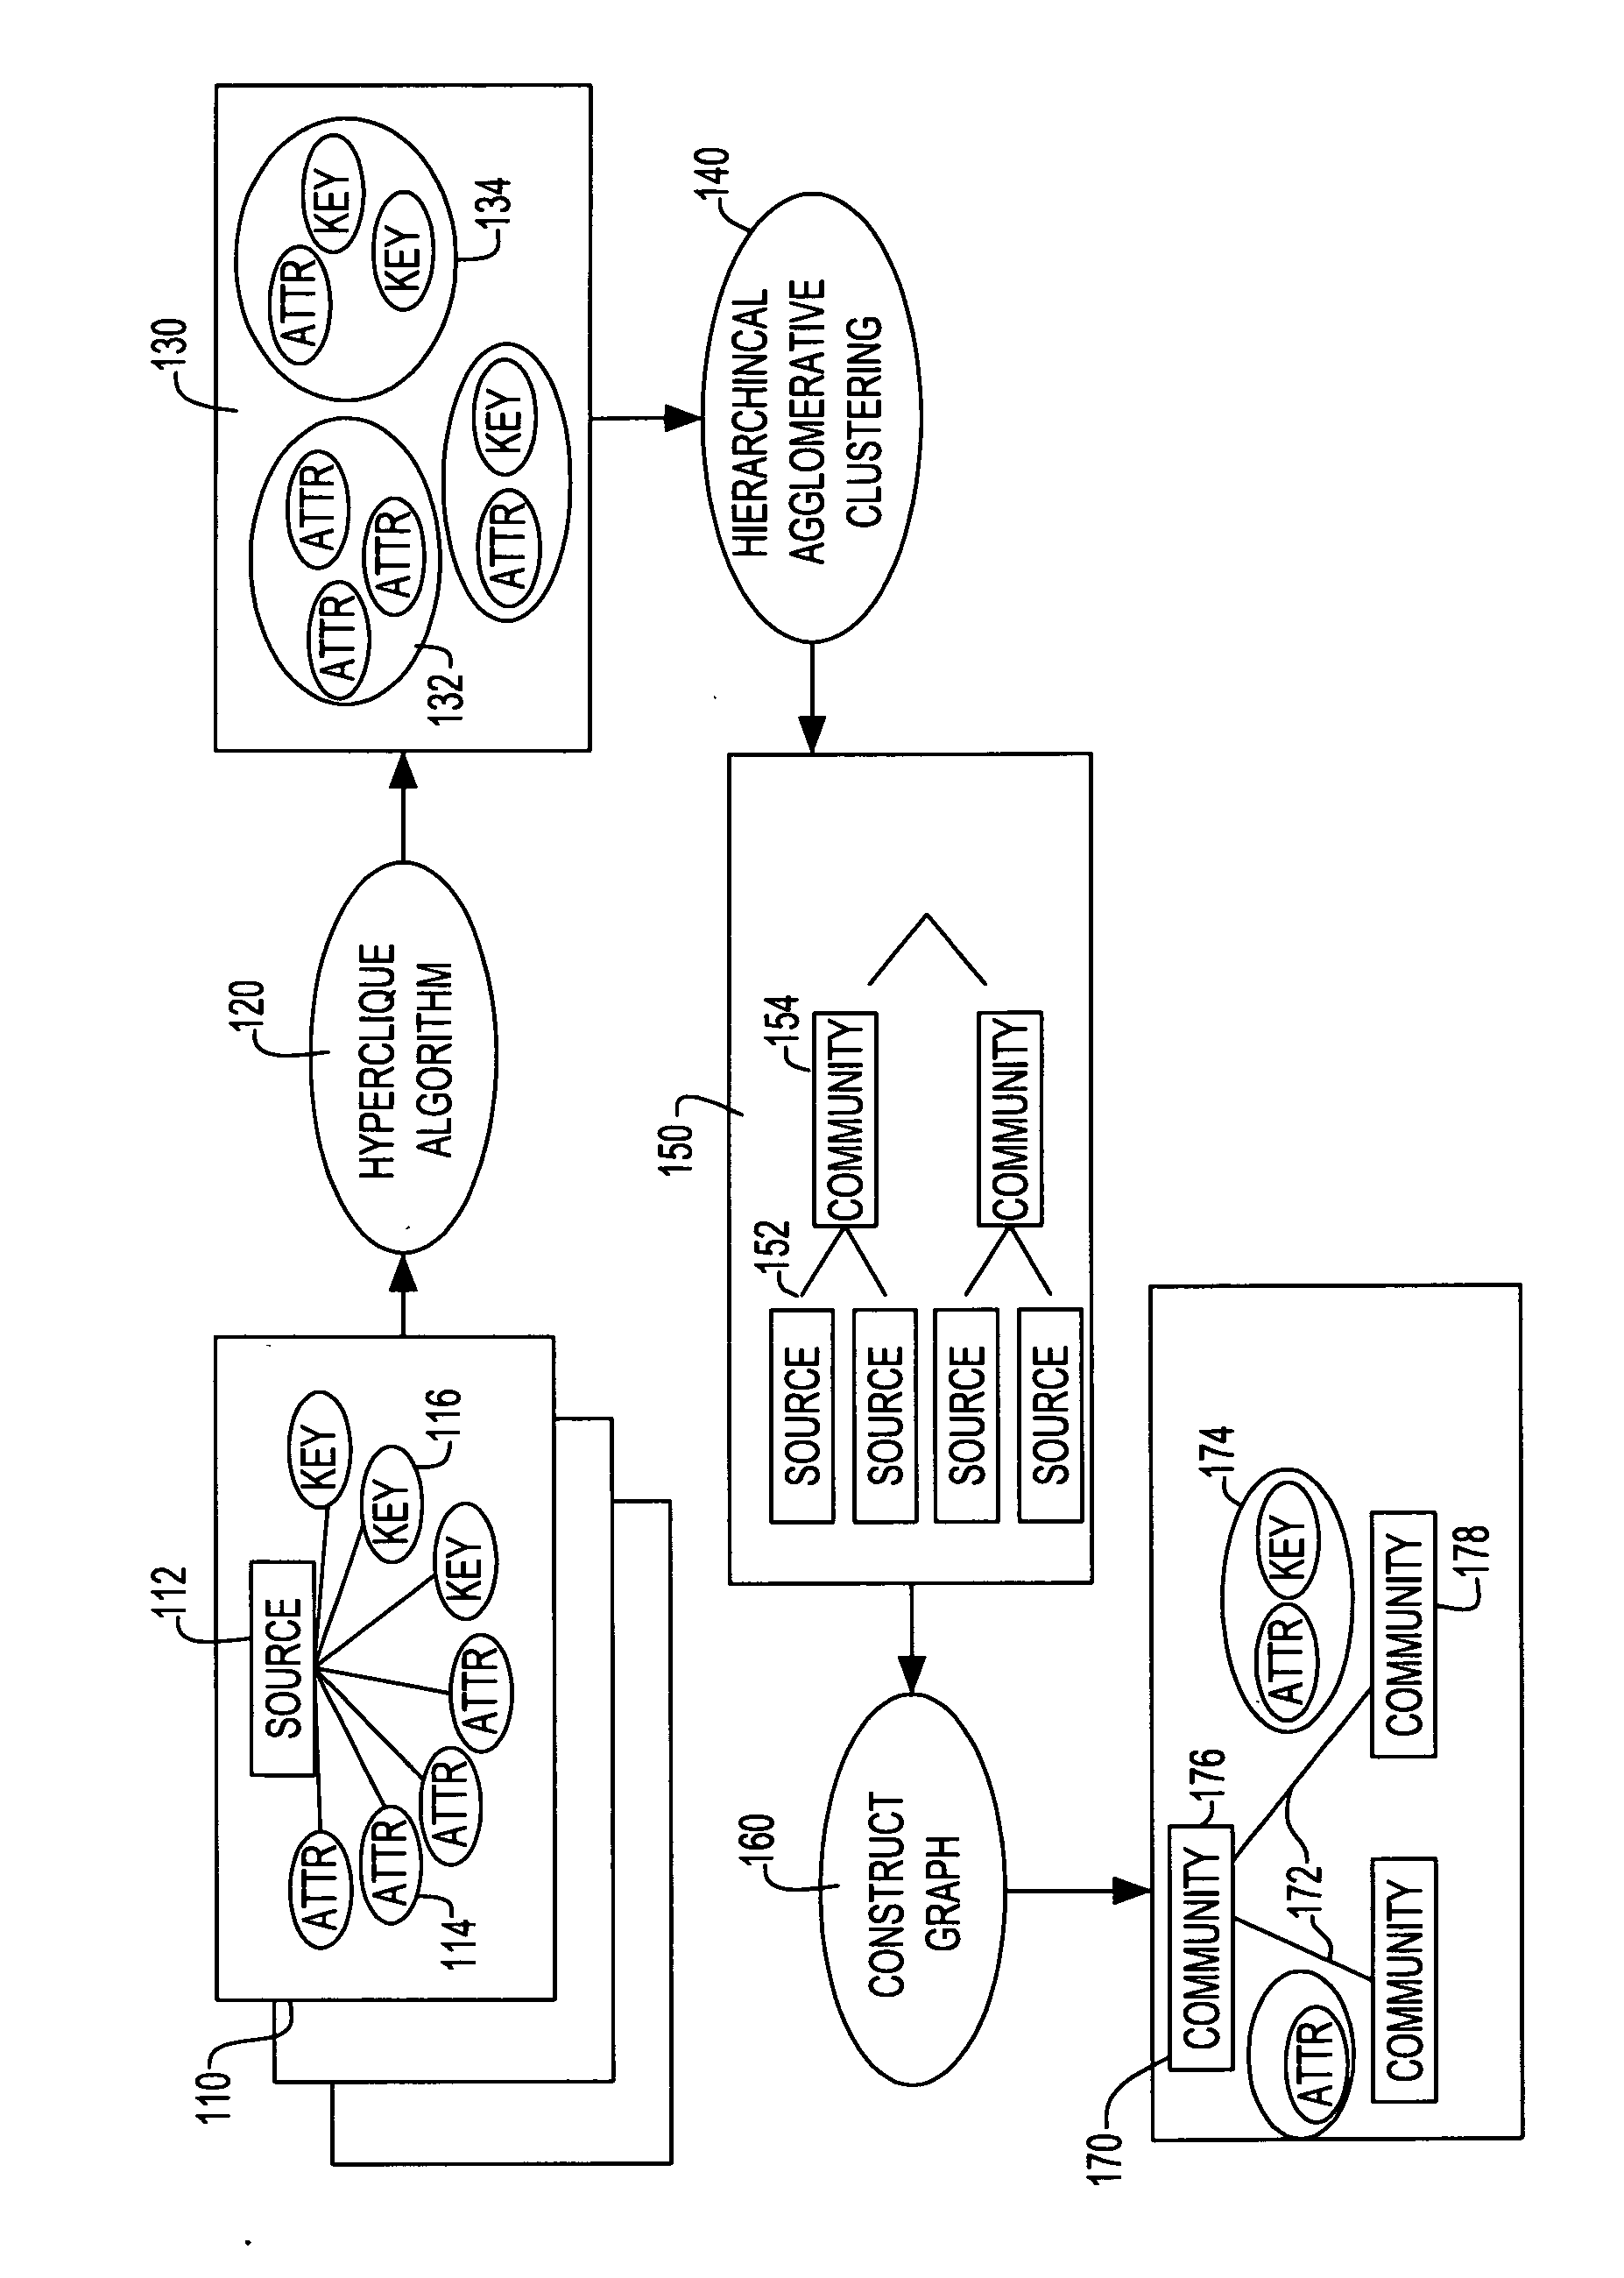 Method and apparatus for organizing data sources